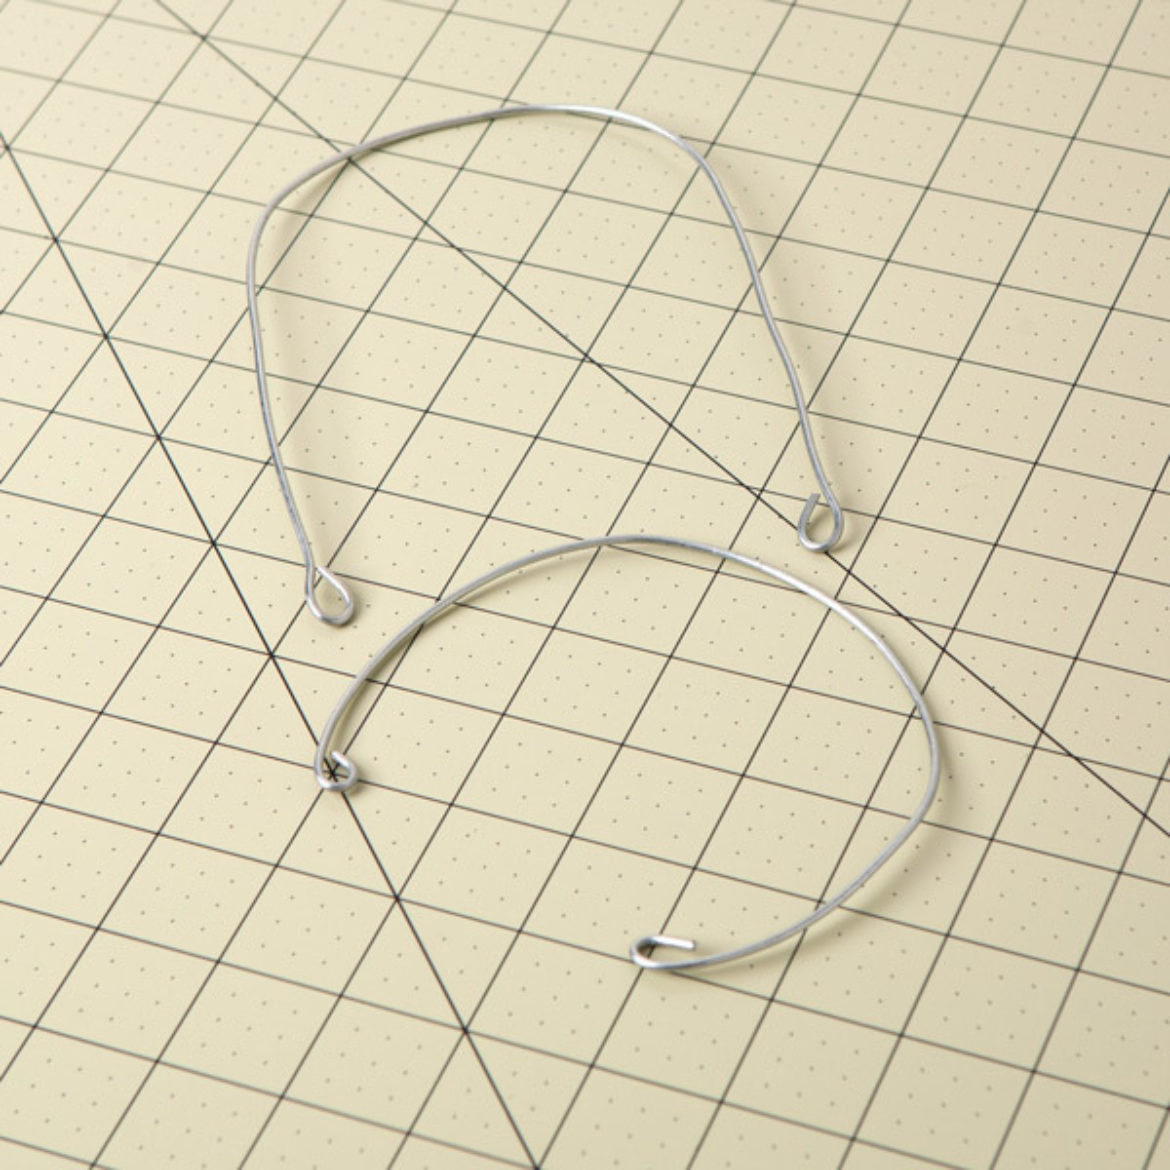 short wire bent into a u shape with loops on either end. Longer wire bent into a circular shape with the ends formed into loops